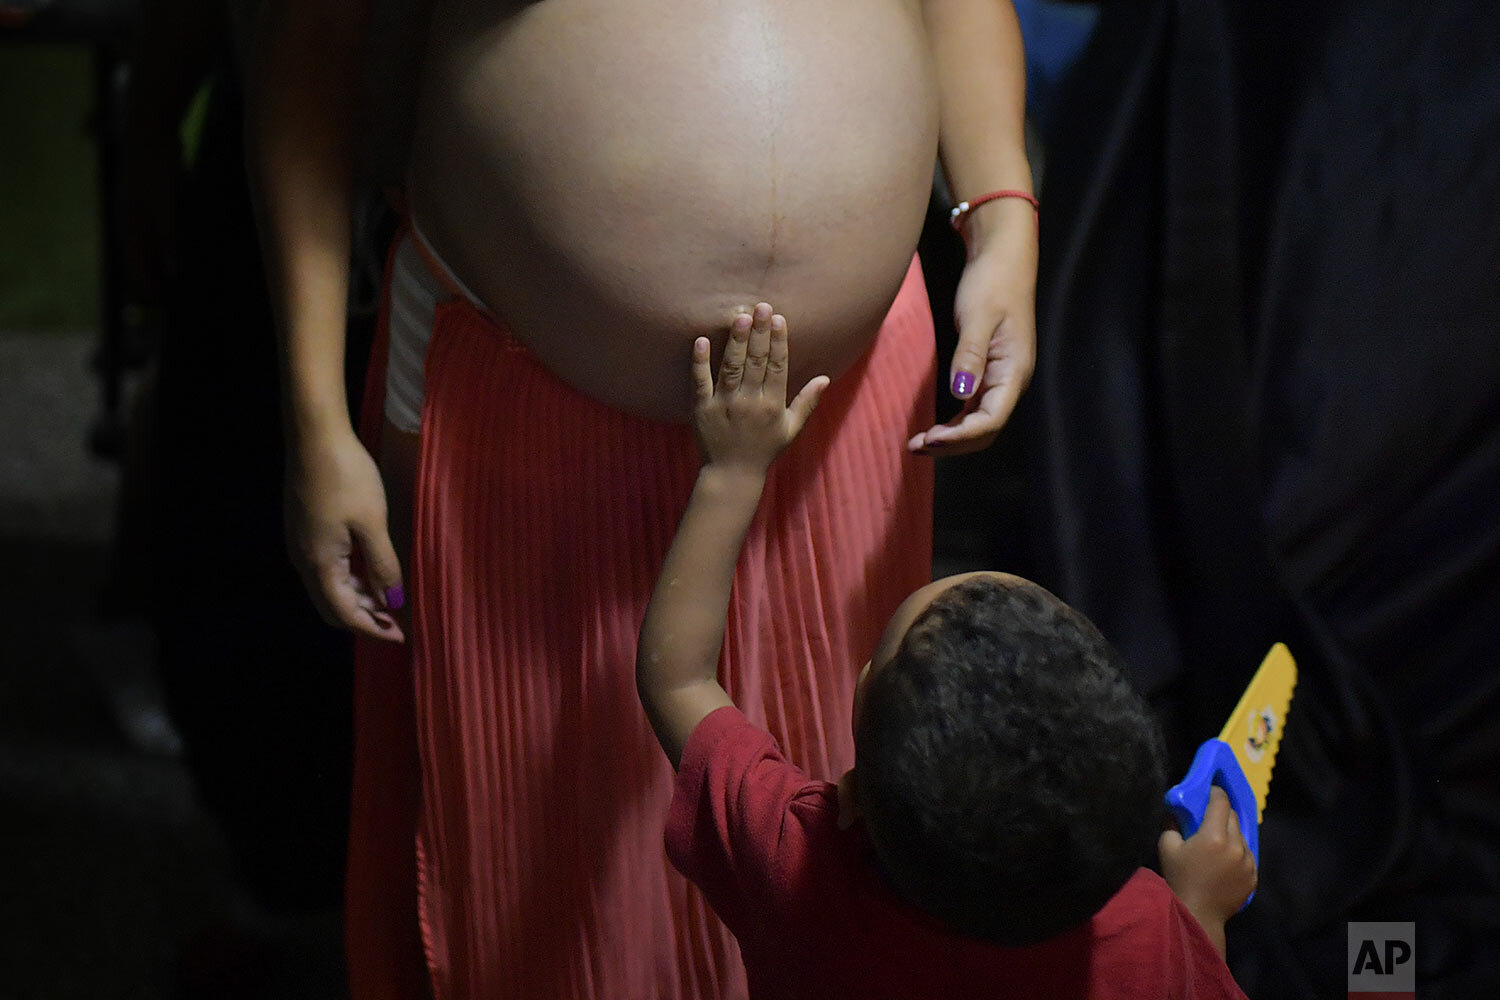  Ada Mendoza's nephew touches her pregnant belly at her parents' apartment where she lives with her partner and seven relatives in the Catia neighborhood of Caracas, Venezuela, Aug. 27, 2020. Mendoza, who must use public transport to get to her prena